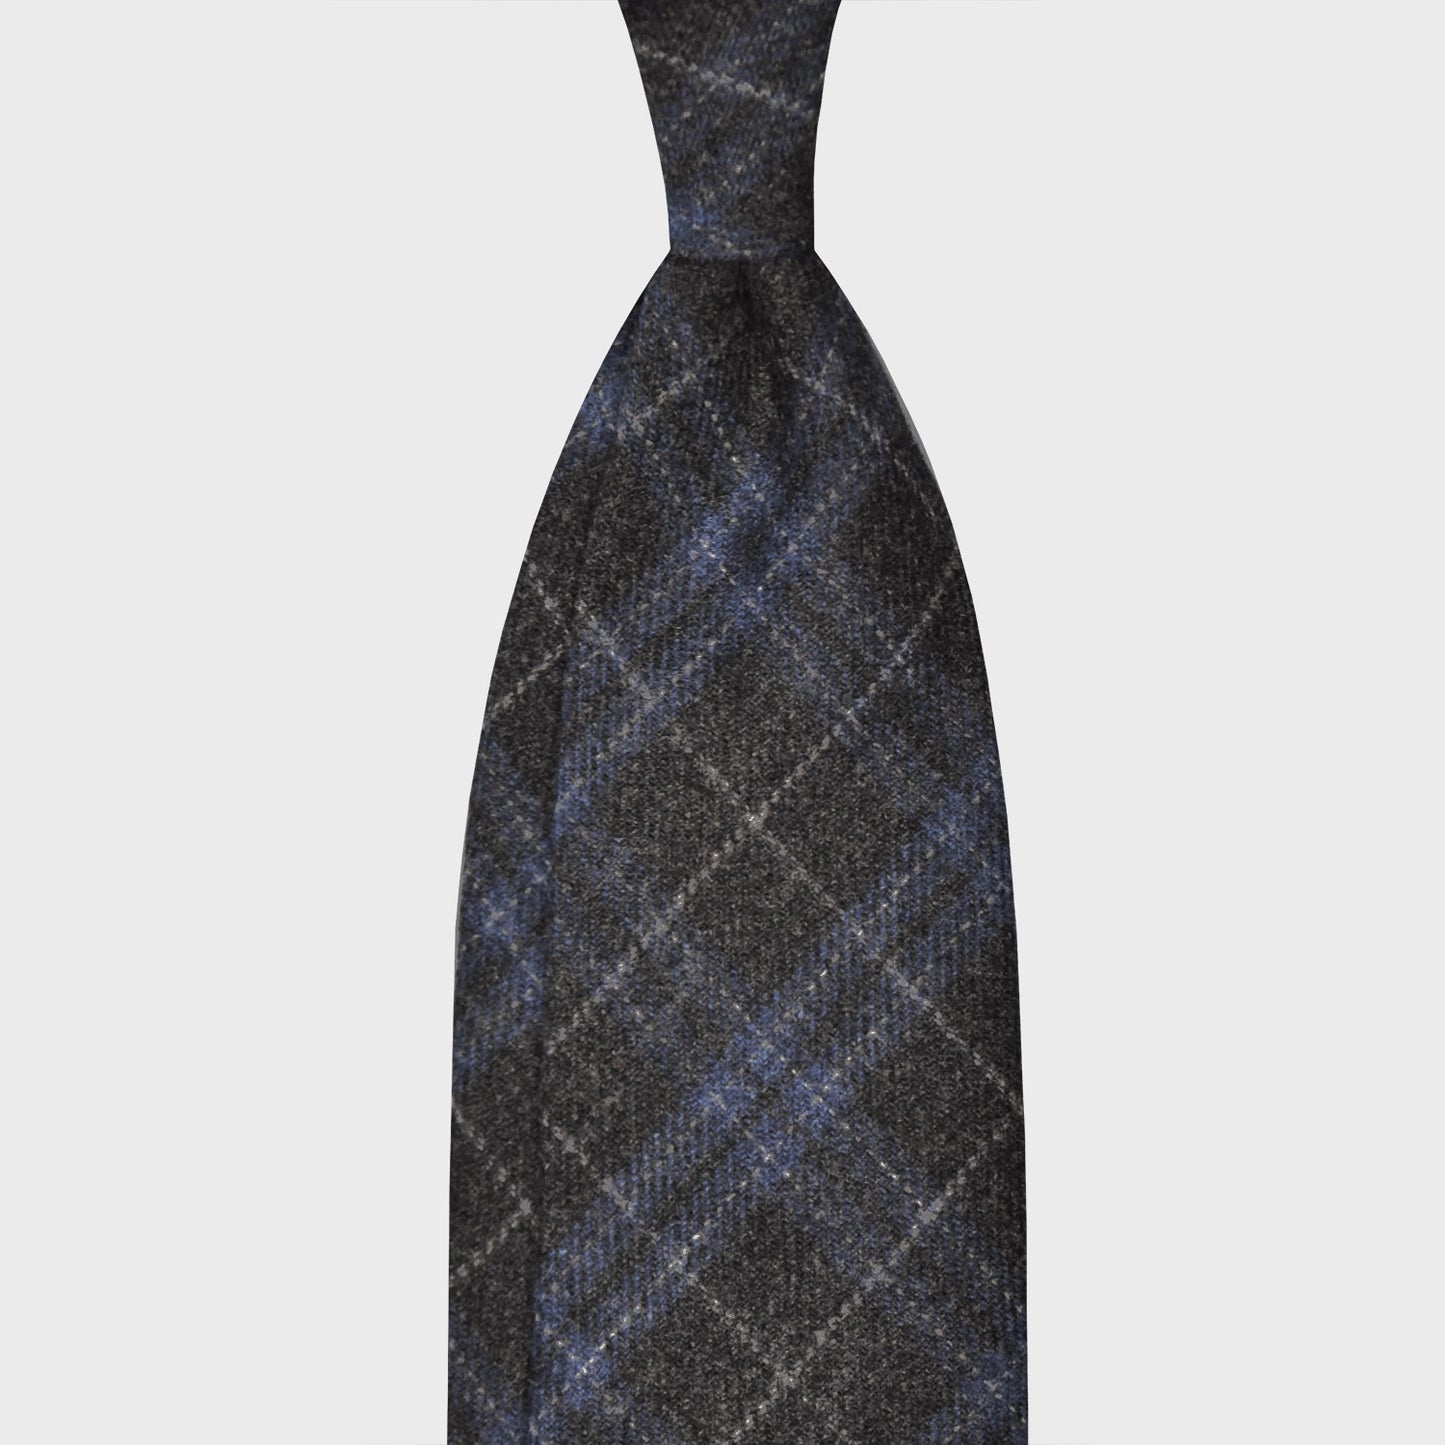 Grey Windowpane Flannel Wool Tie 3 Folds Unlined F.Marino. Soft and refined flannel wool tie, handmade F.Marino for Wools Boutique Uomo, hand rolled edge, anthracite grey background, ice grey and pervinca blue windowpane pattern.